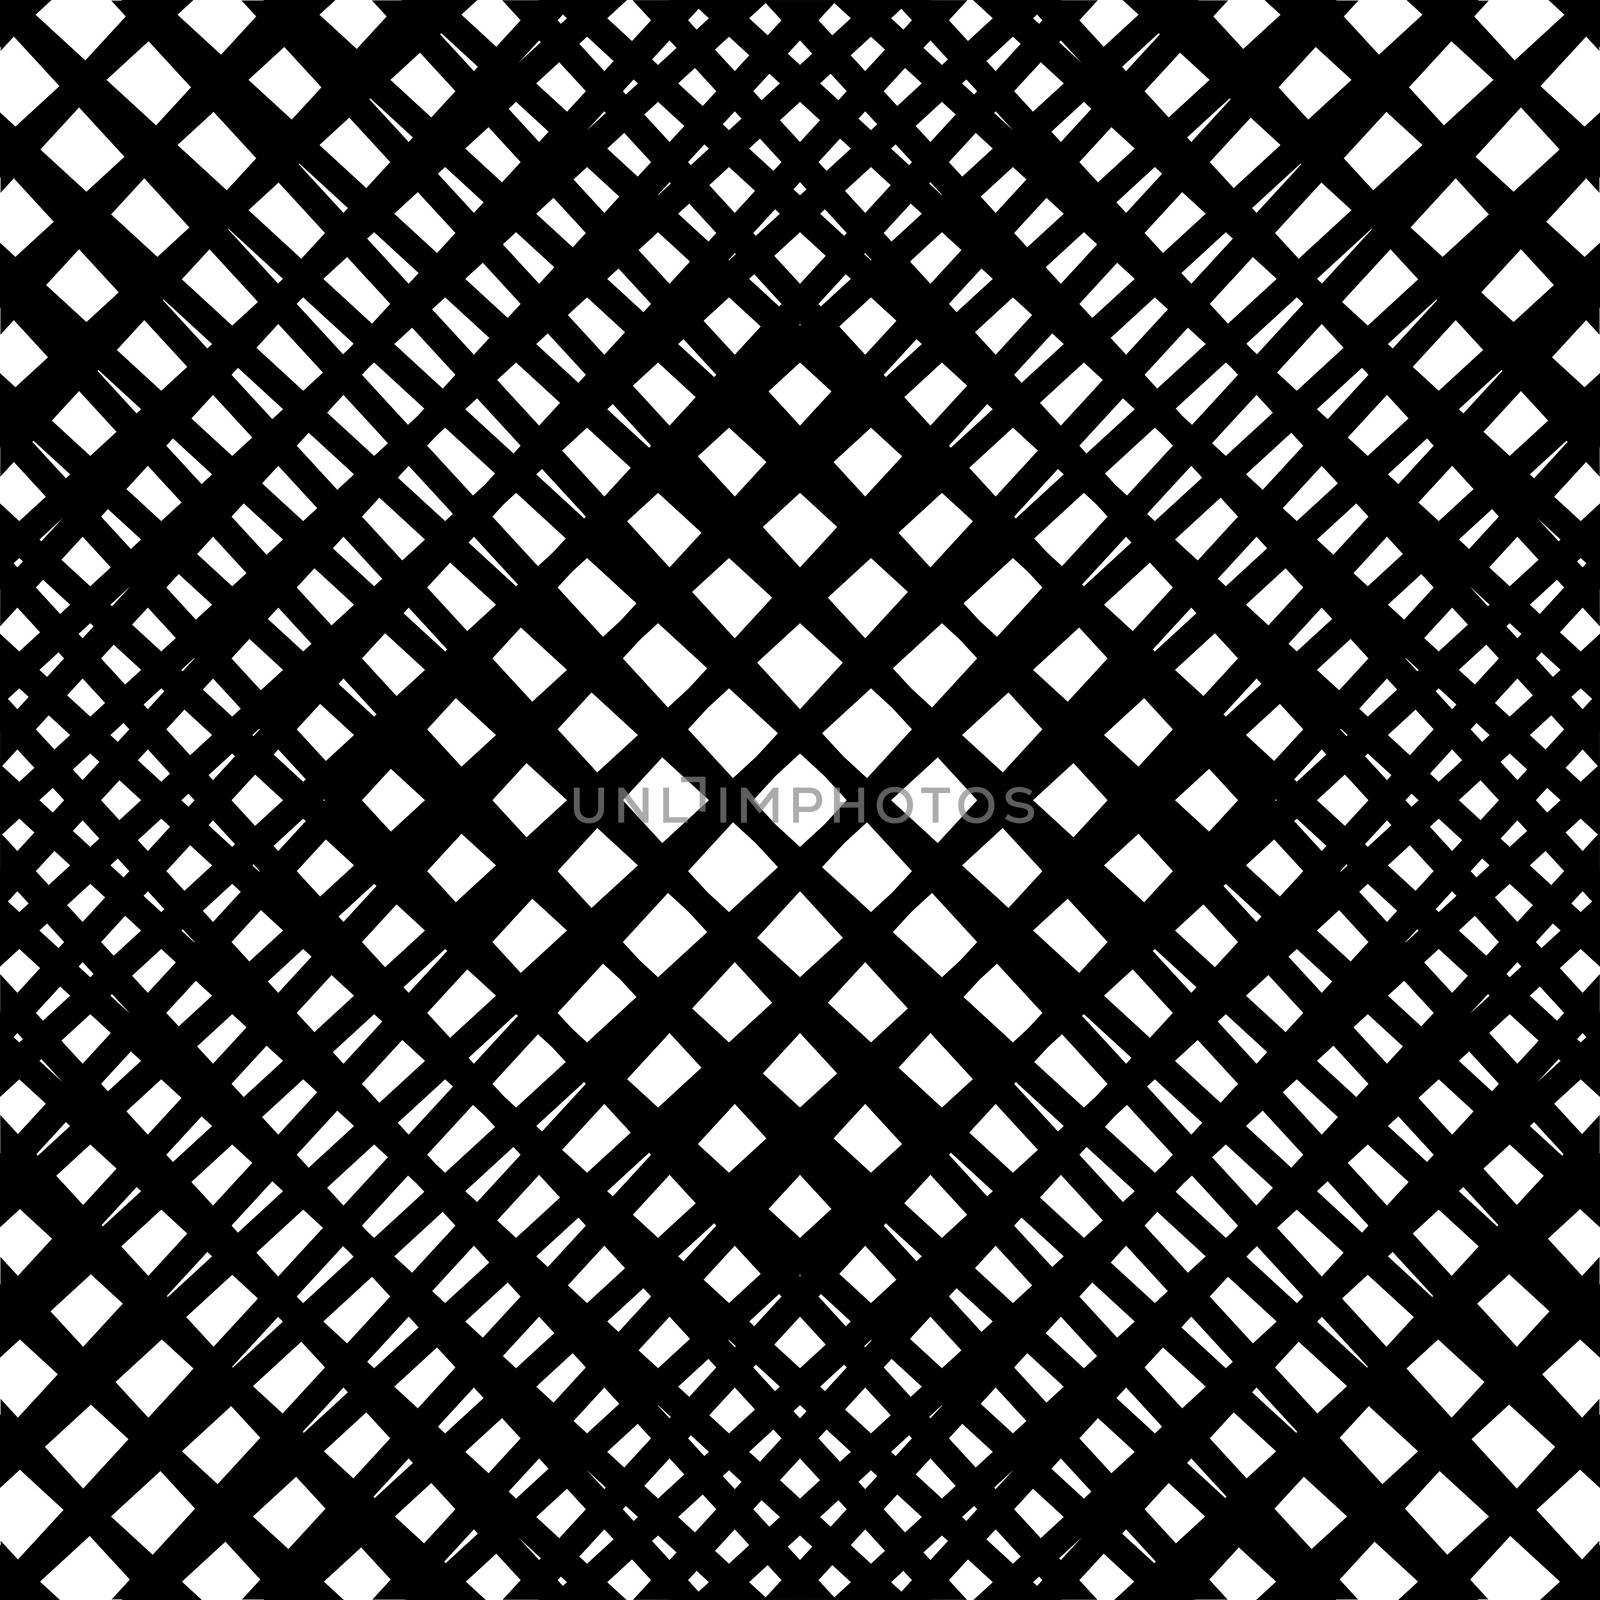 Abstract black and white mosaic background.